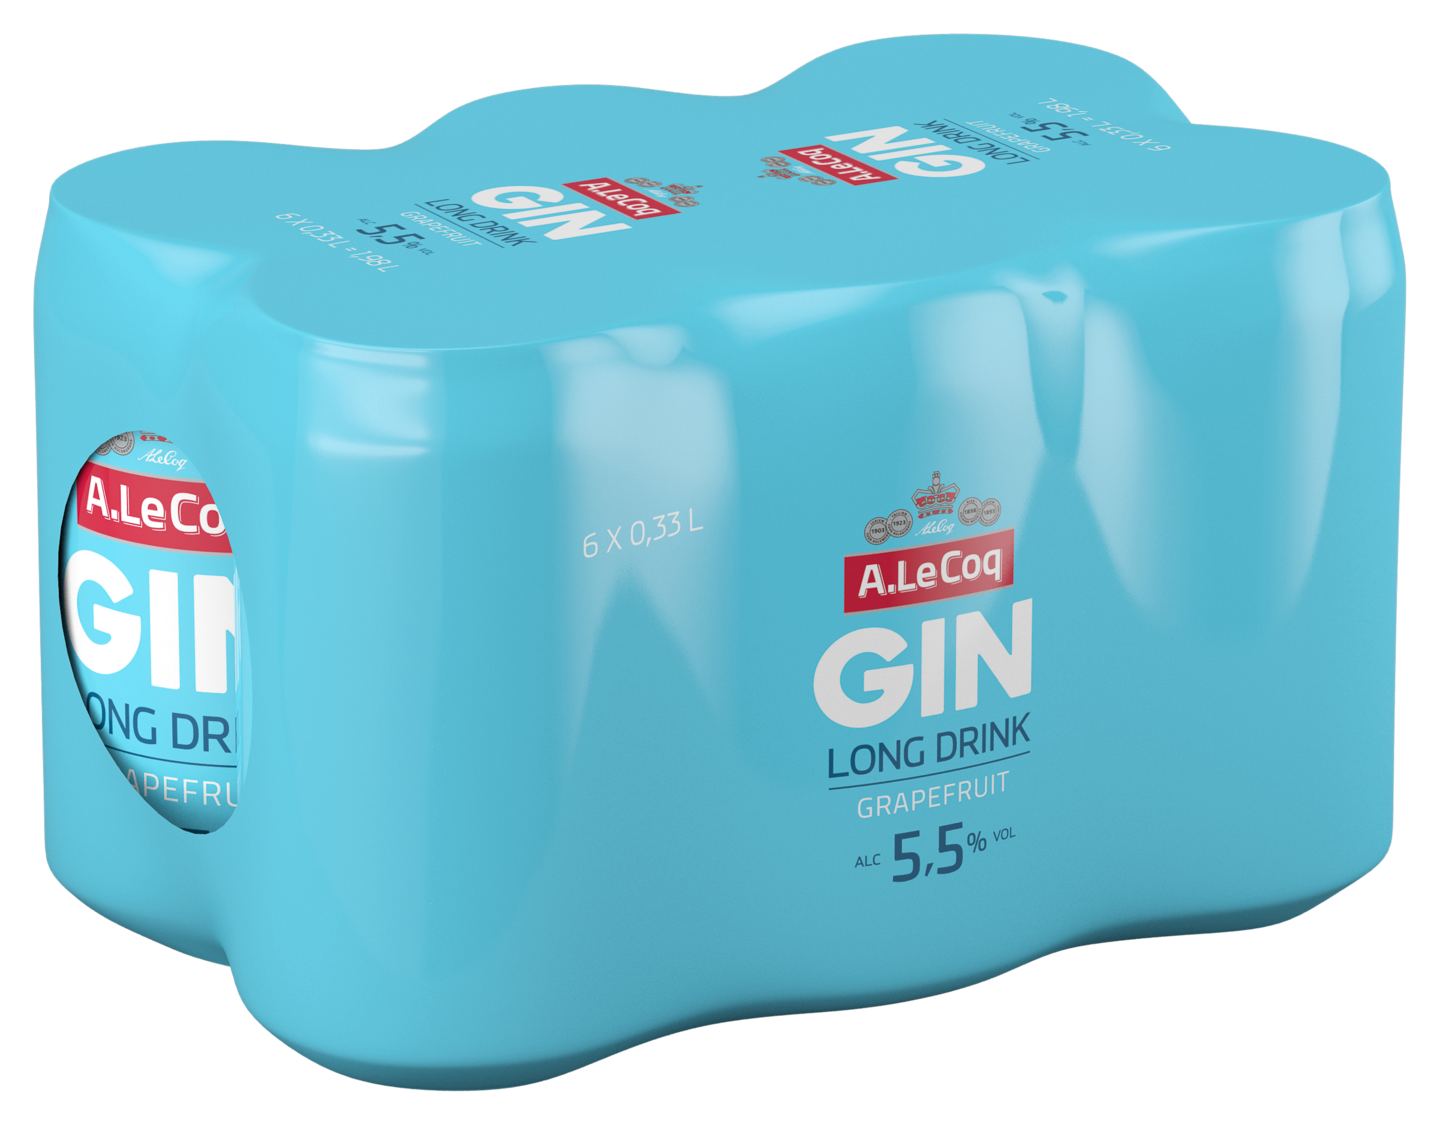 A.Le Coq GIN Grapefruit Long Drink 5,5% 0,33l 6-pack DOLLY